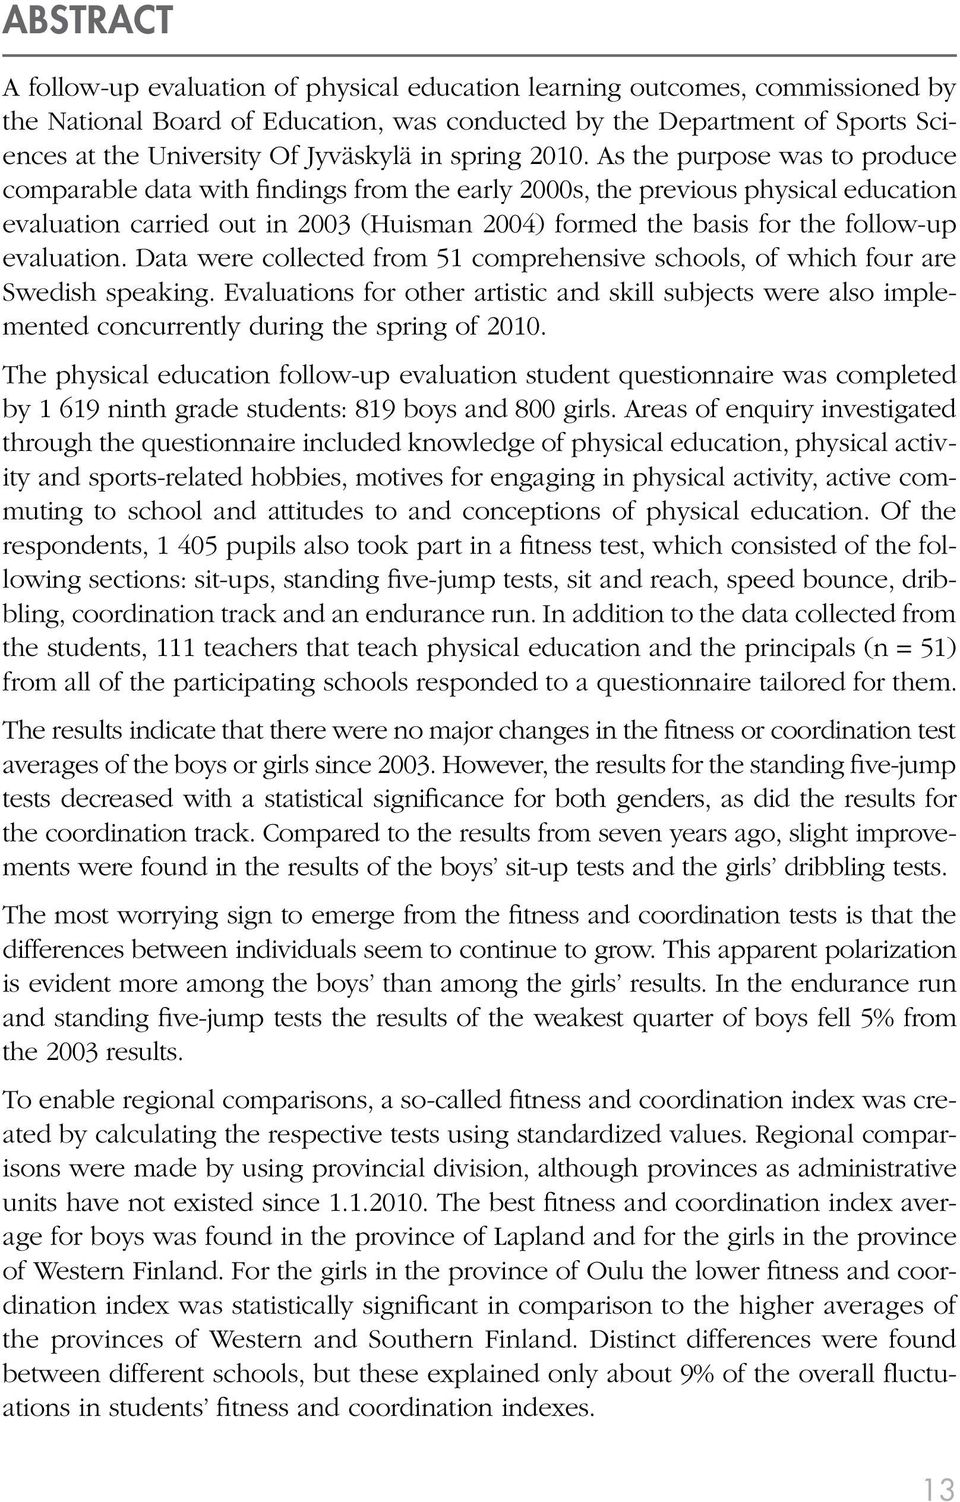 As the purpose was to produce comparable data with findings from the early 2000s, the previous physical education evaluation carried out in 2003 (Huisman 2004) formed the basis for the follow-up